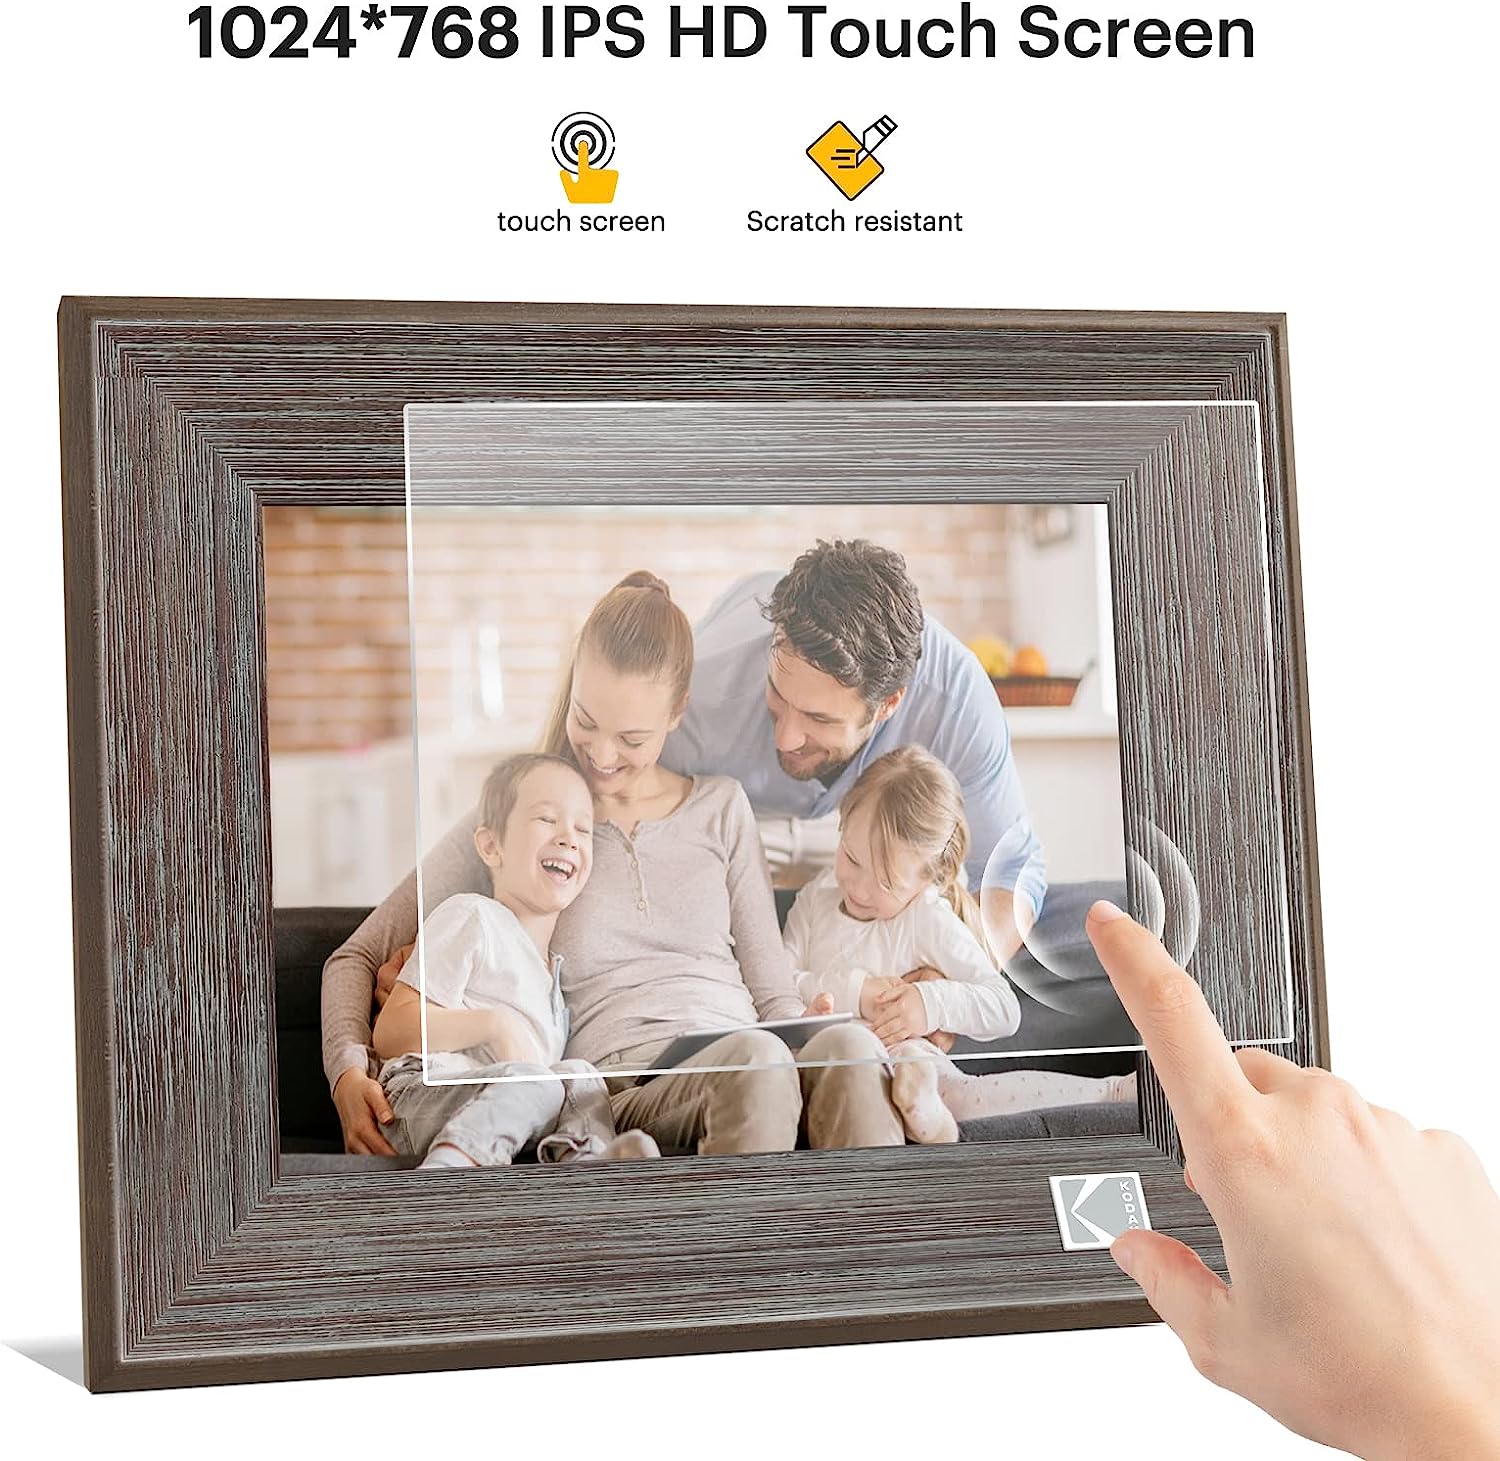 Kodak 8-inch Wi-Fi Classic Digital Photo Frame RCF-8013W, Touch Screen, Wooden Frame, 16GB Internal Memory with Music, Video, Calendar and Weather Display Features